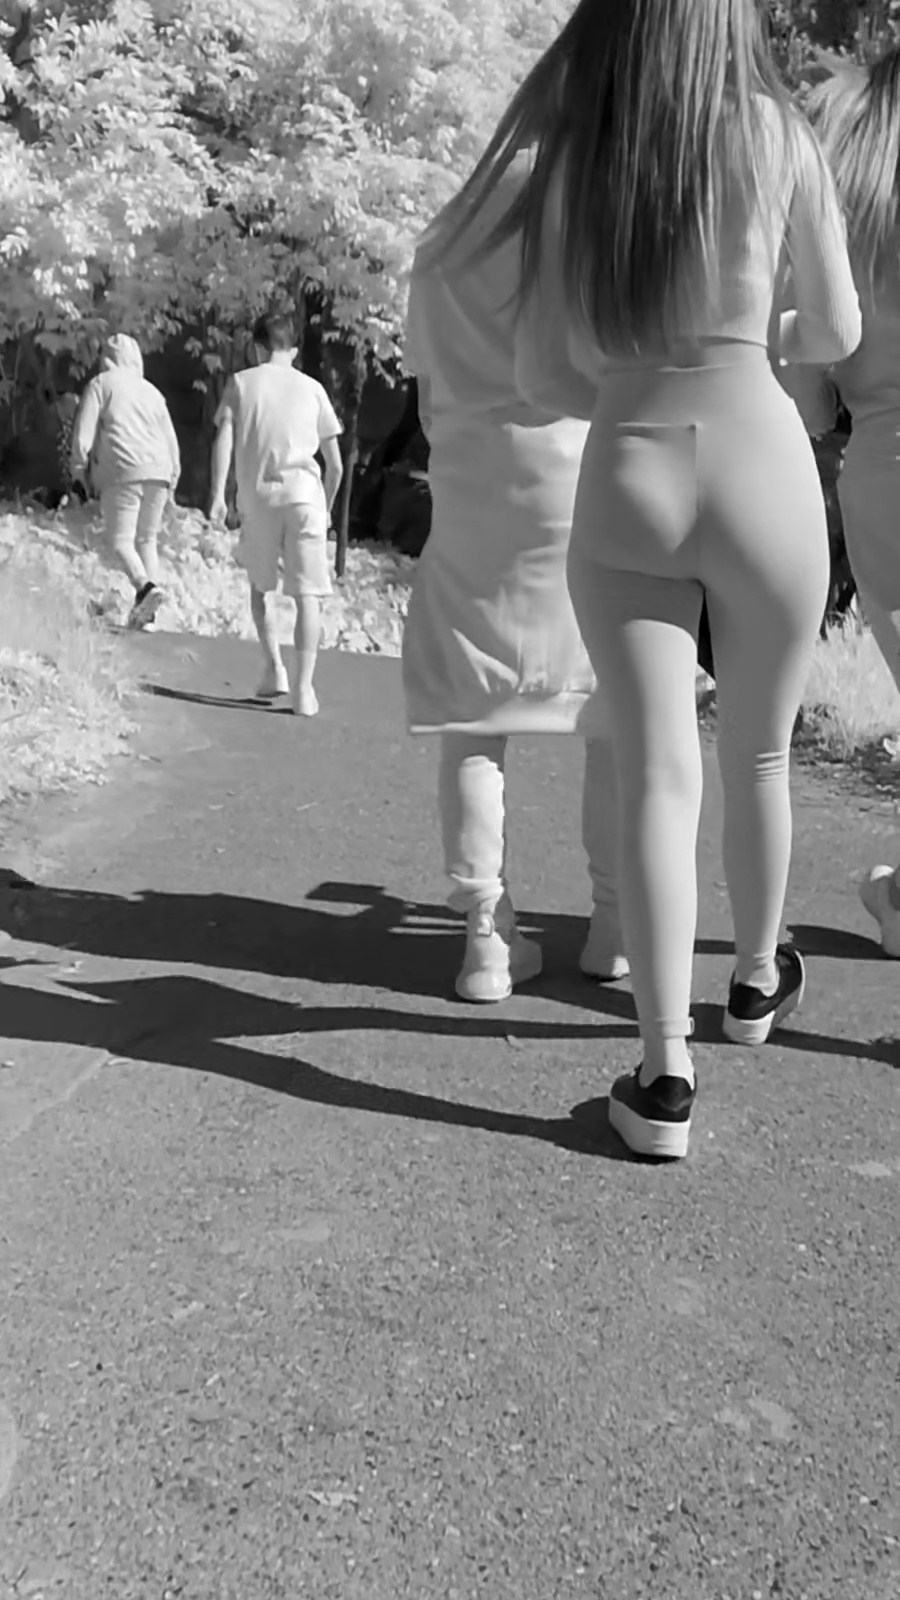 Cute Slim TEEN With BIG ASS In White Spandex With Visible Panty Lines - Candid Teens - Creepshots - Candid Voyeur Girls - Candid Ass Girls